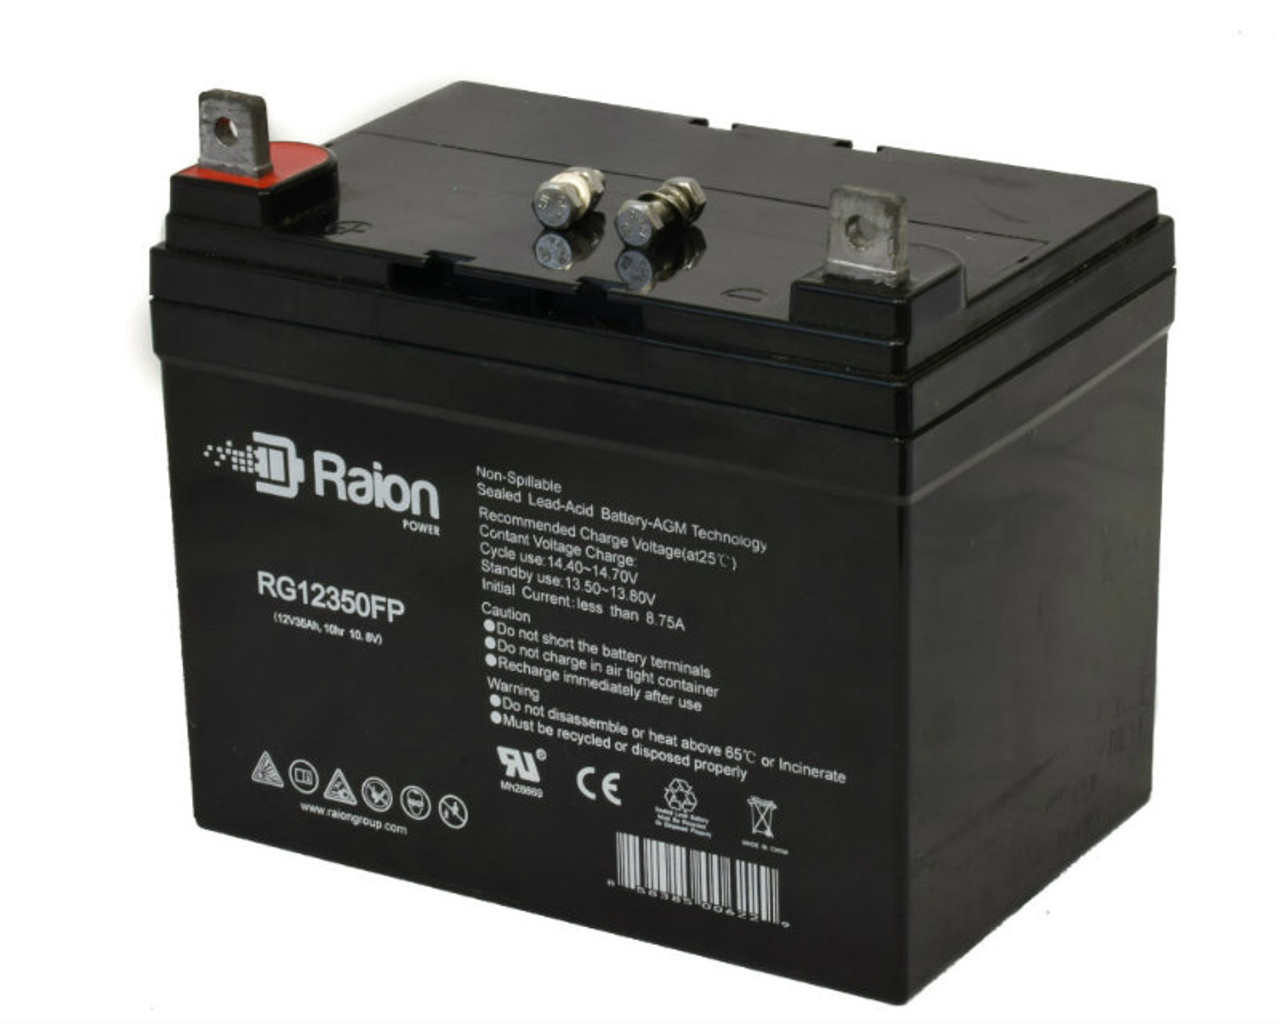 Raion Power Replacement 12V 35Ah Battery for Sabre 1843HV - 1 Pack